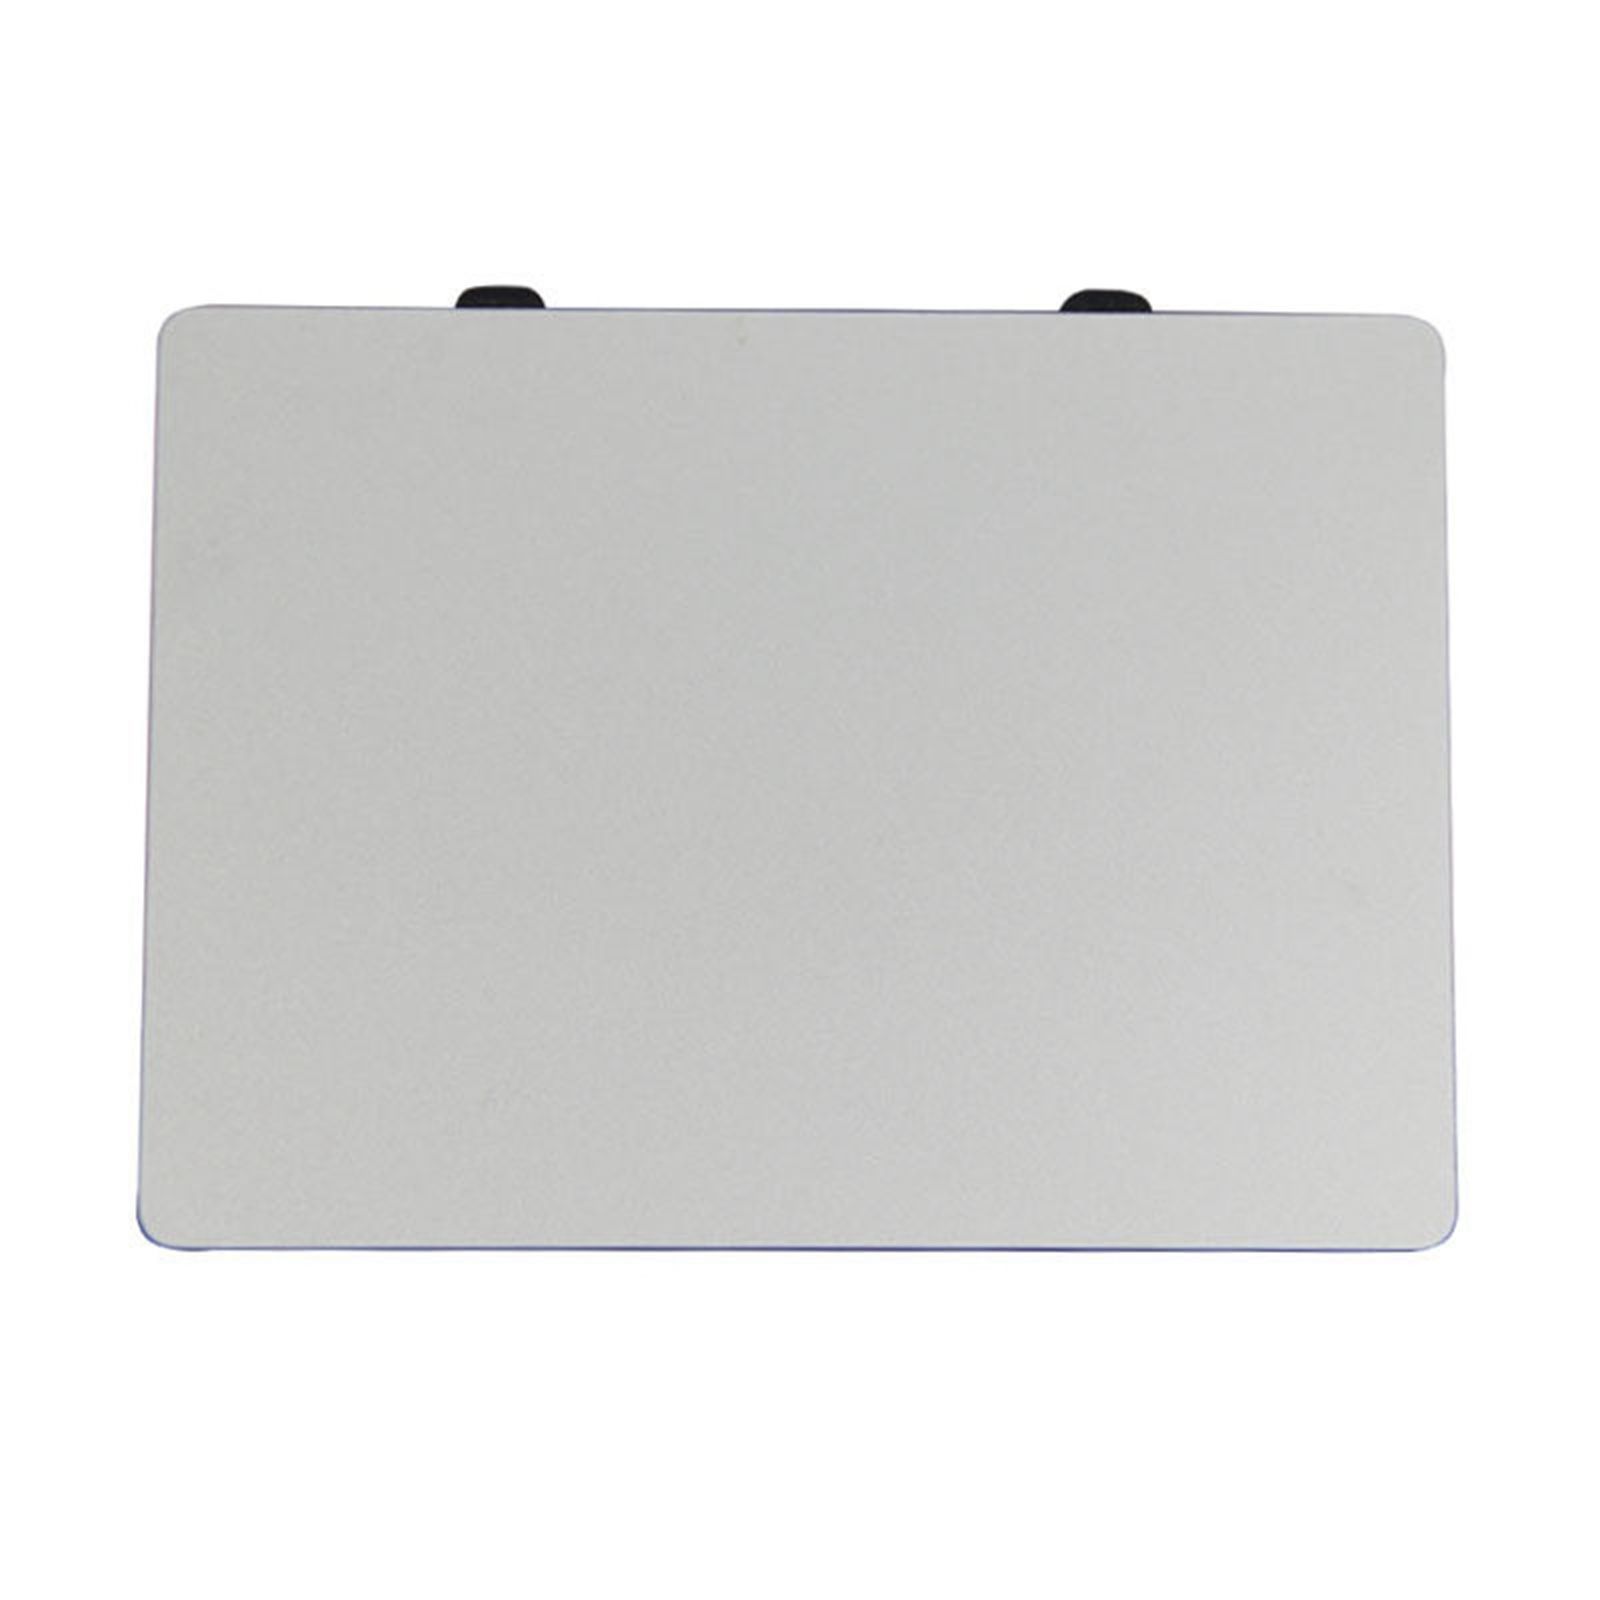 CHUOT CAM UNG trackpad touchpad for Macbook Pro A1286 Unibody 2009 2010 2011 2012